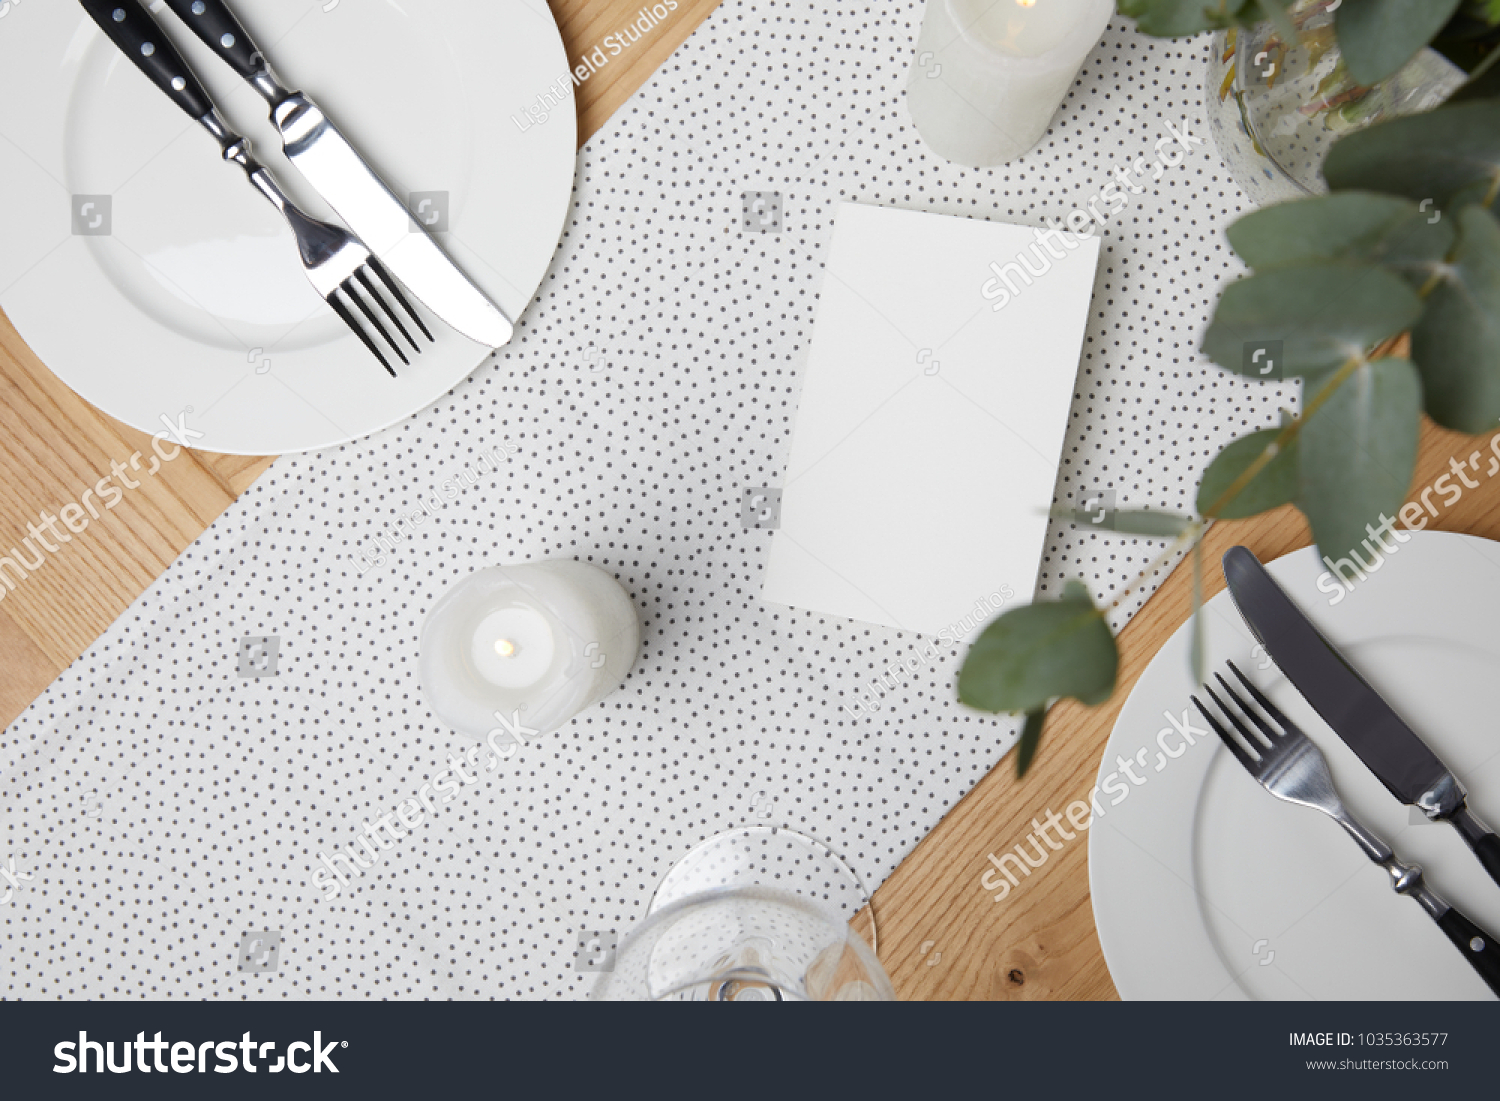 Festive table with cutlery on plates on table with candles #1035363577